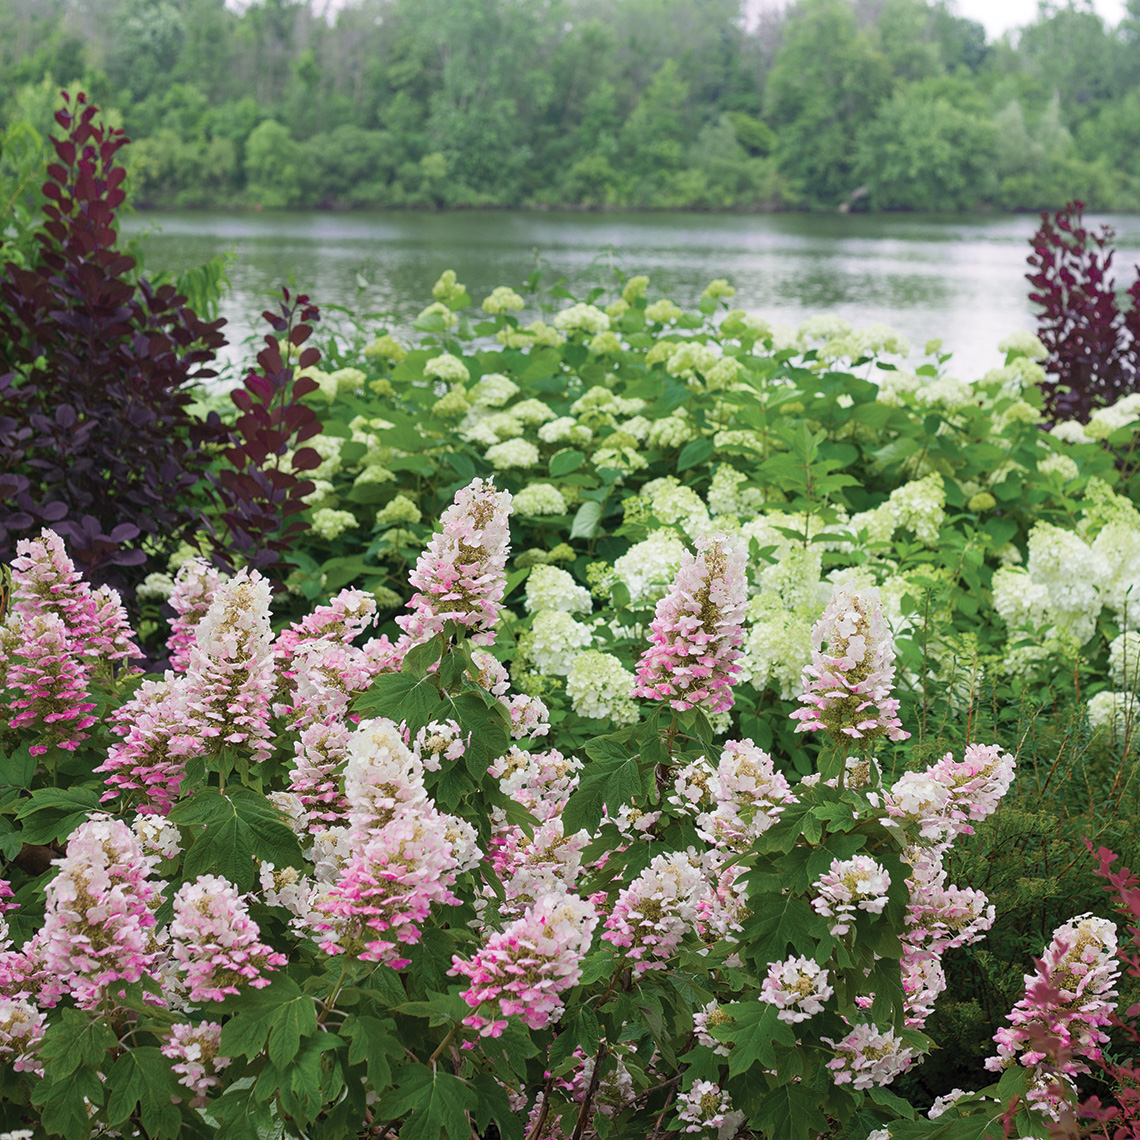 Gatsby Pink oakleaf hydrangea beginign to take on pink flower color in the landscape with the Grand River behind it